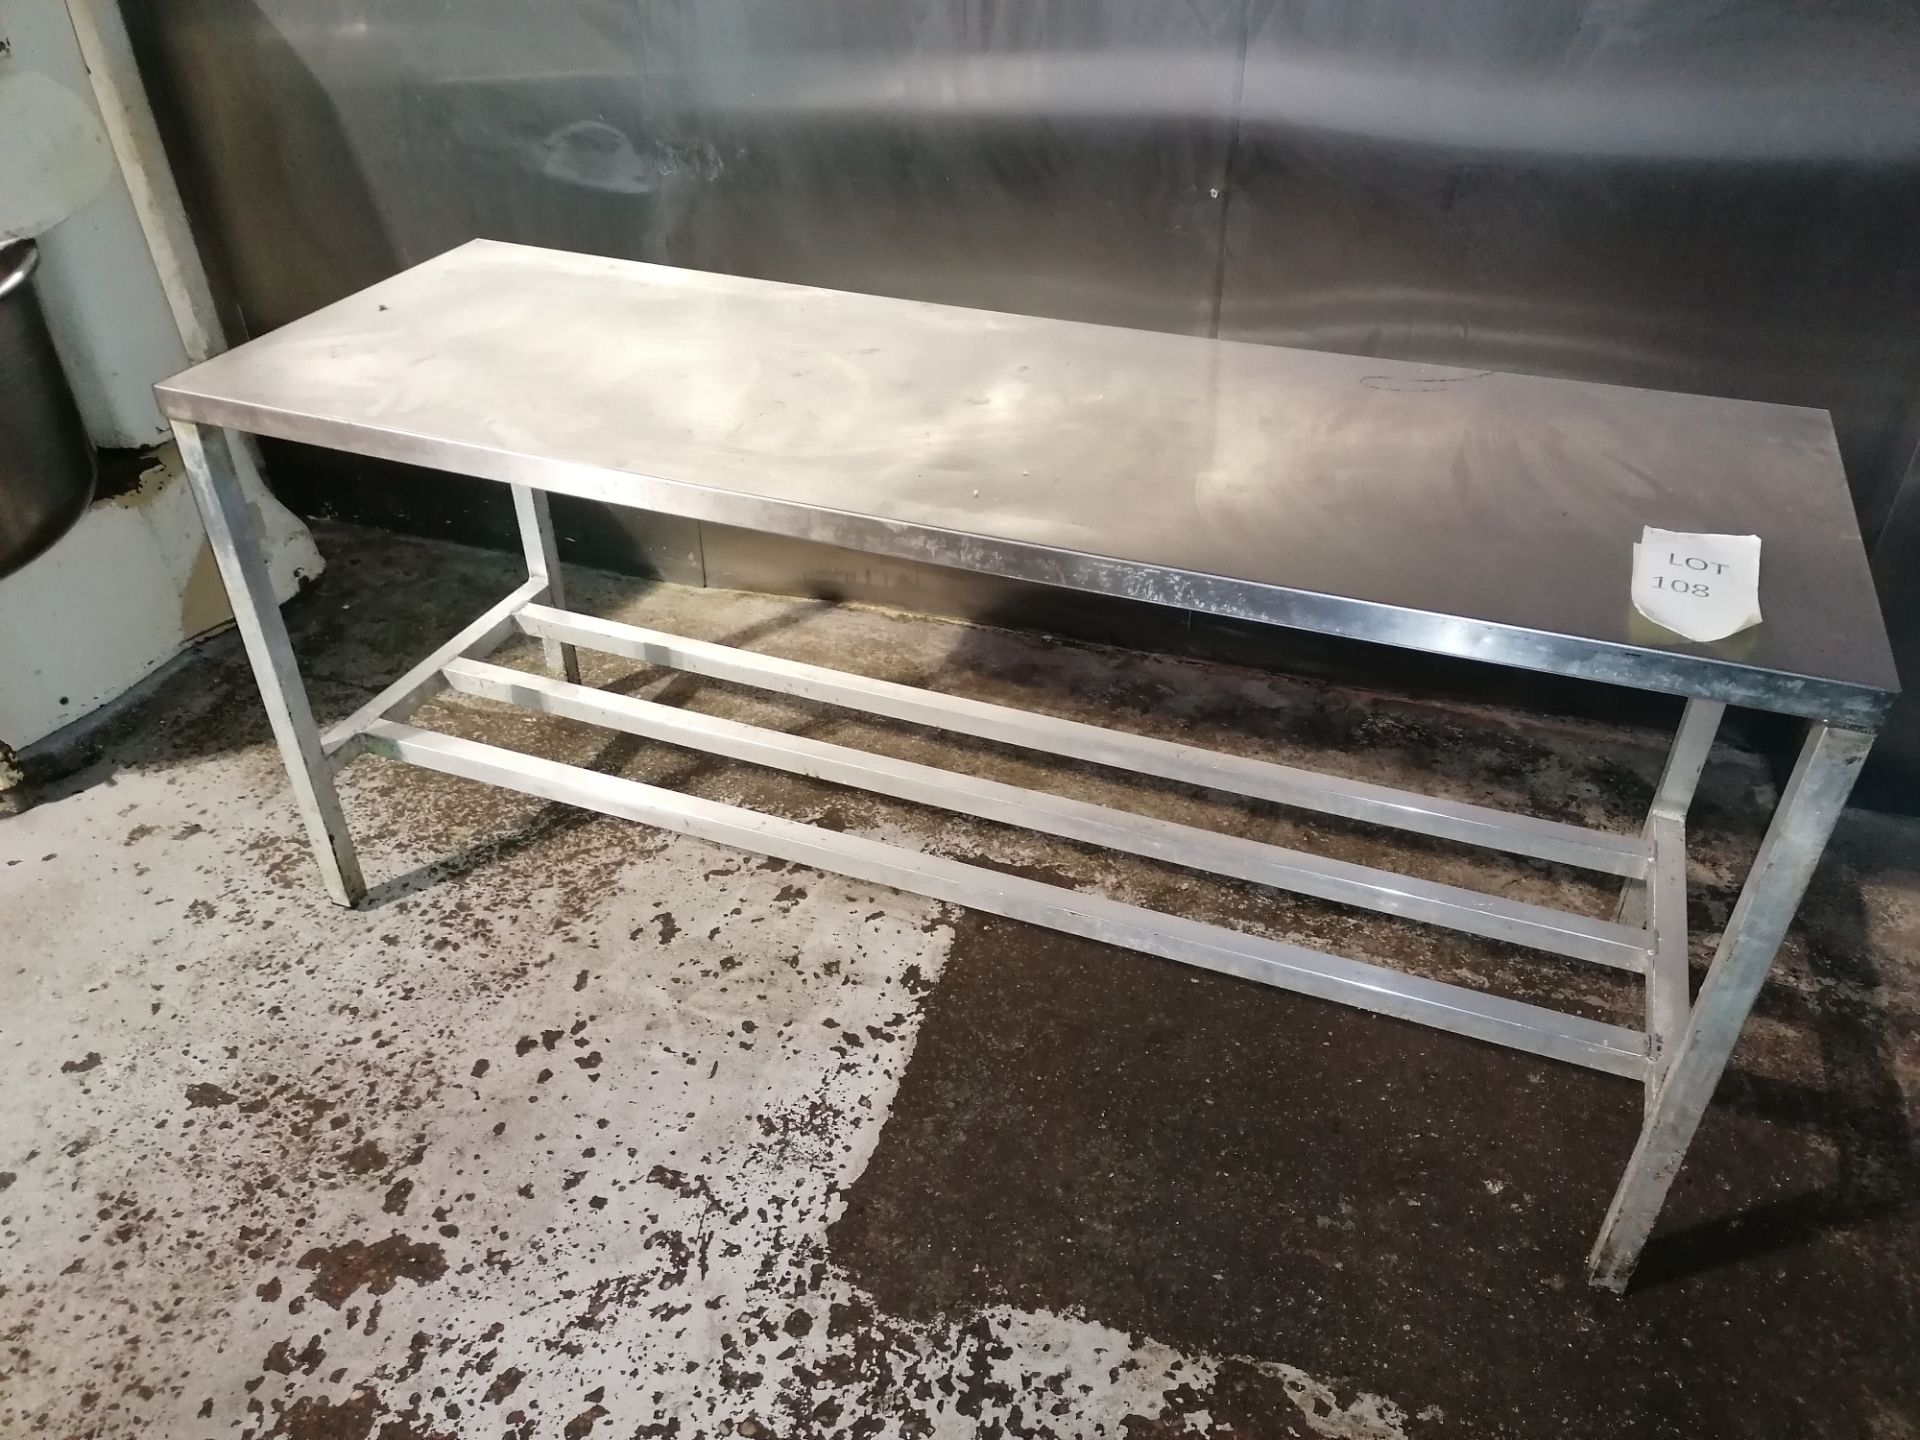 Stinless Steel Preperation Table With Aluminium Frame, Length 183cm Width 91cm Height 83cm - Image 3 of 5